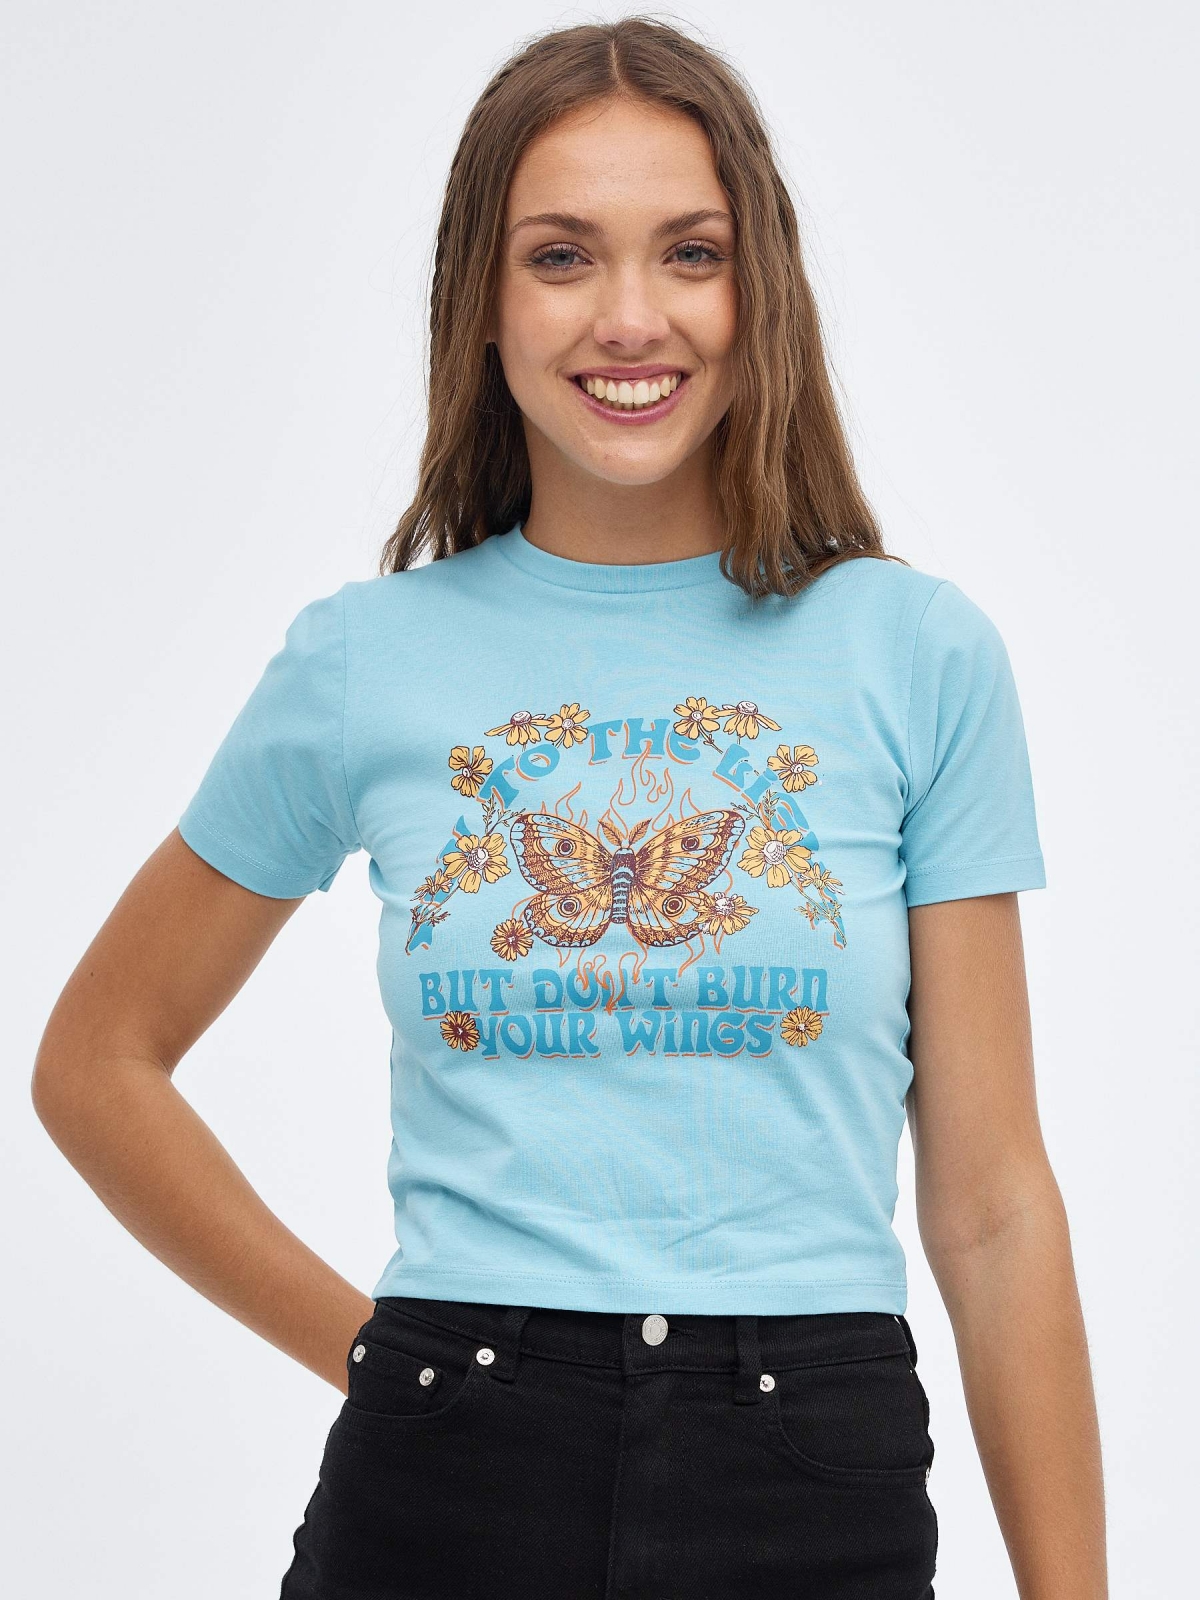 Your Wings T-shirt light blue middle front view